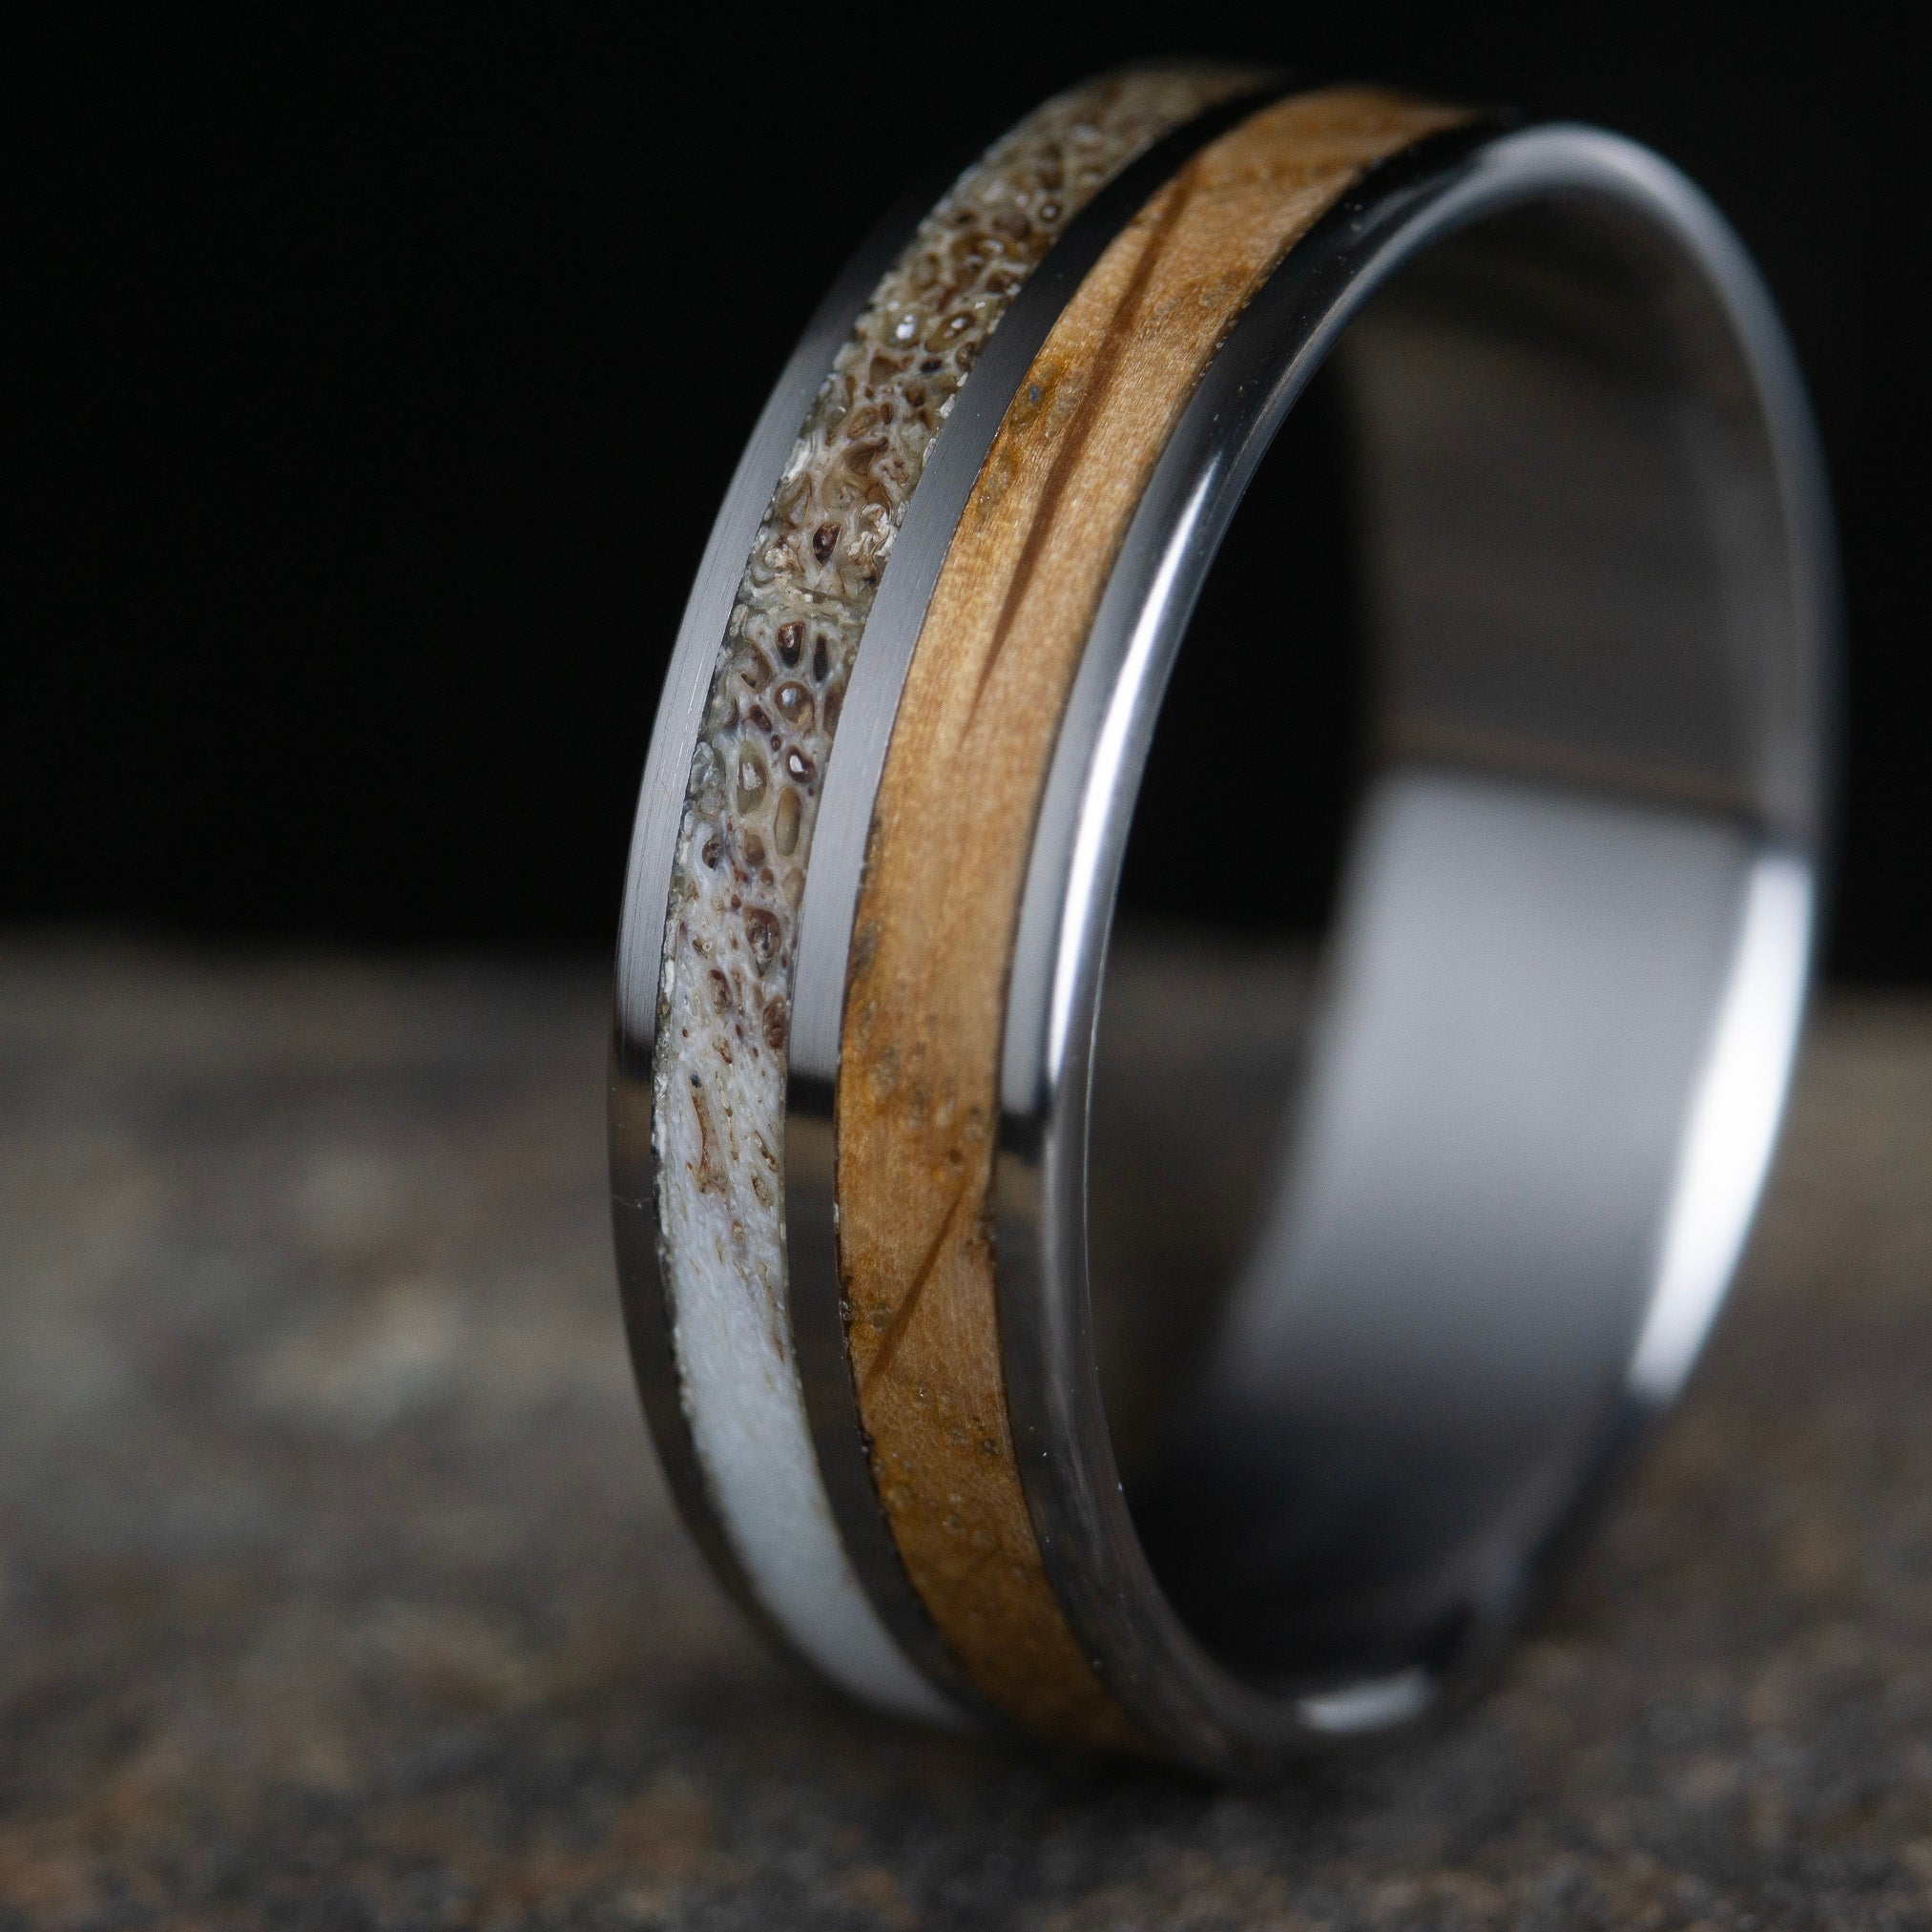 Antle ring with whiskey barrel wood wedding ring